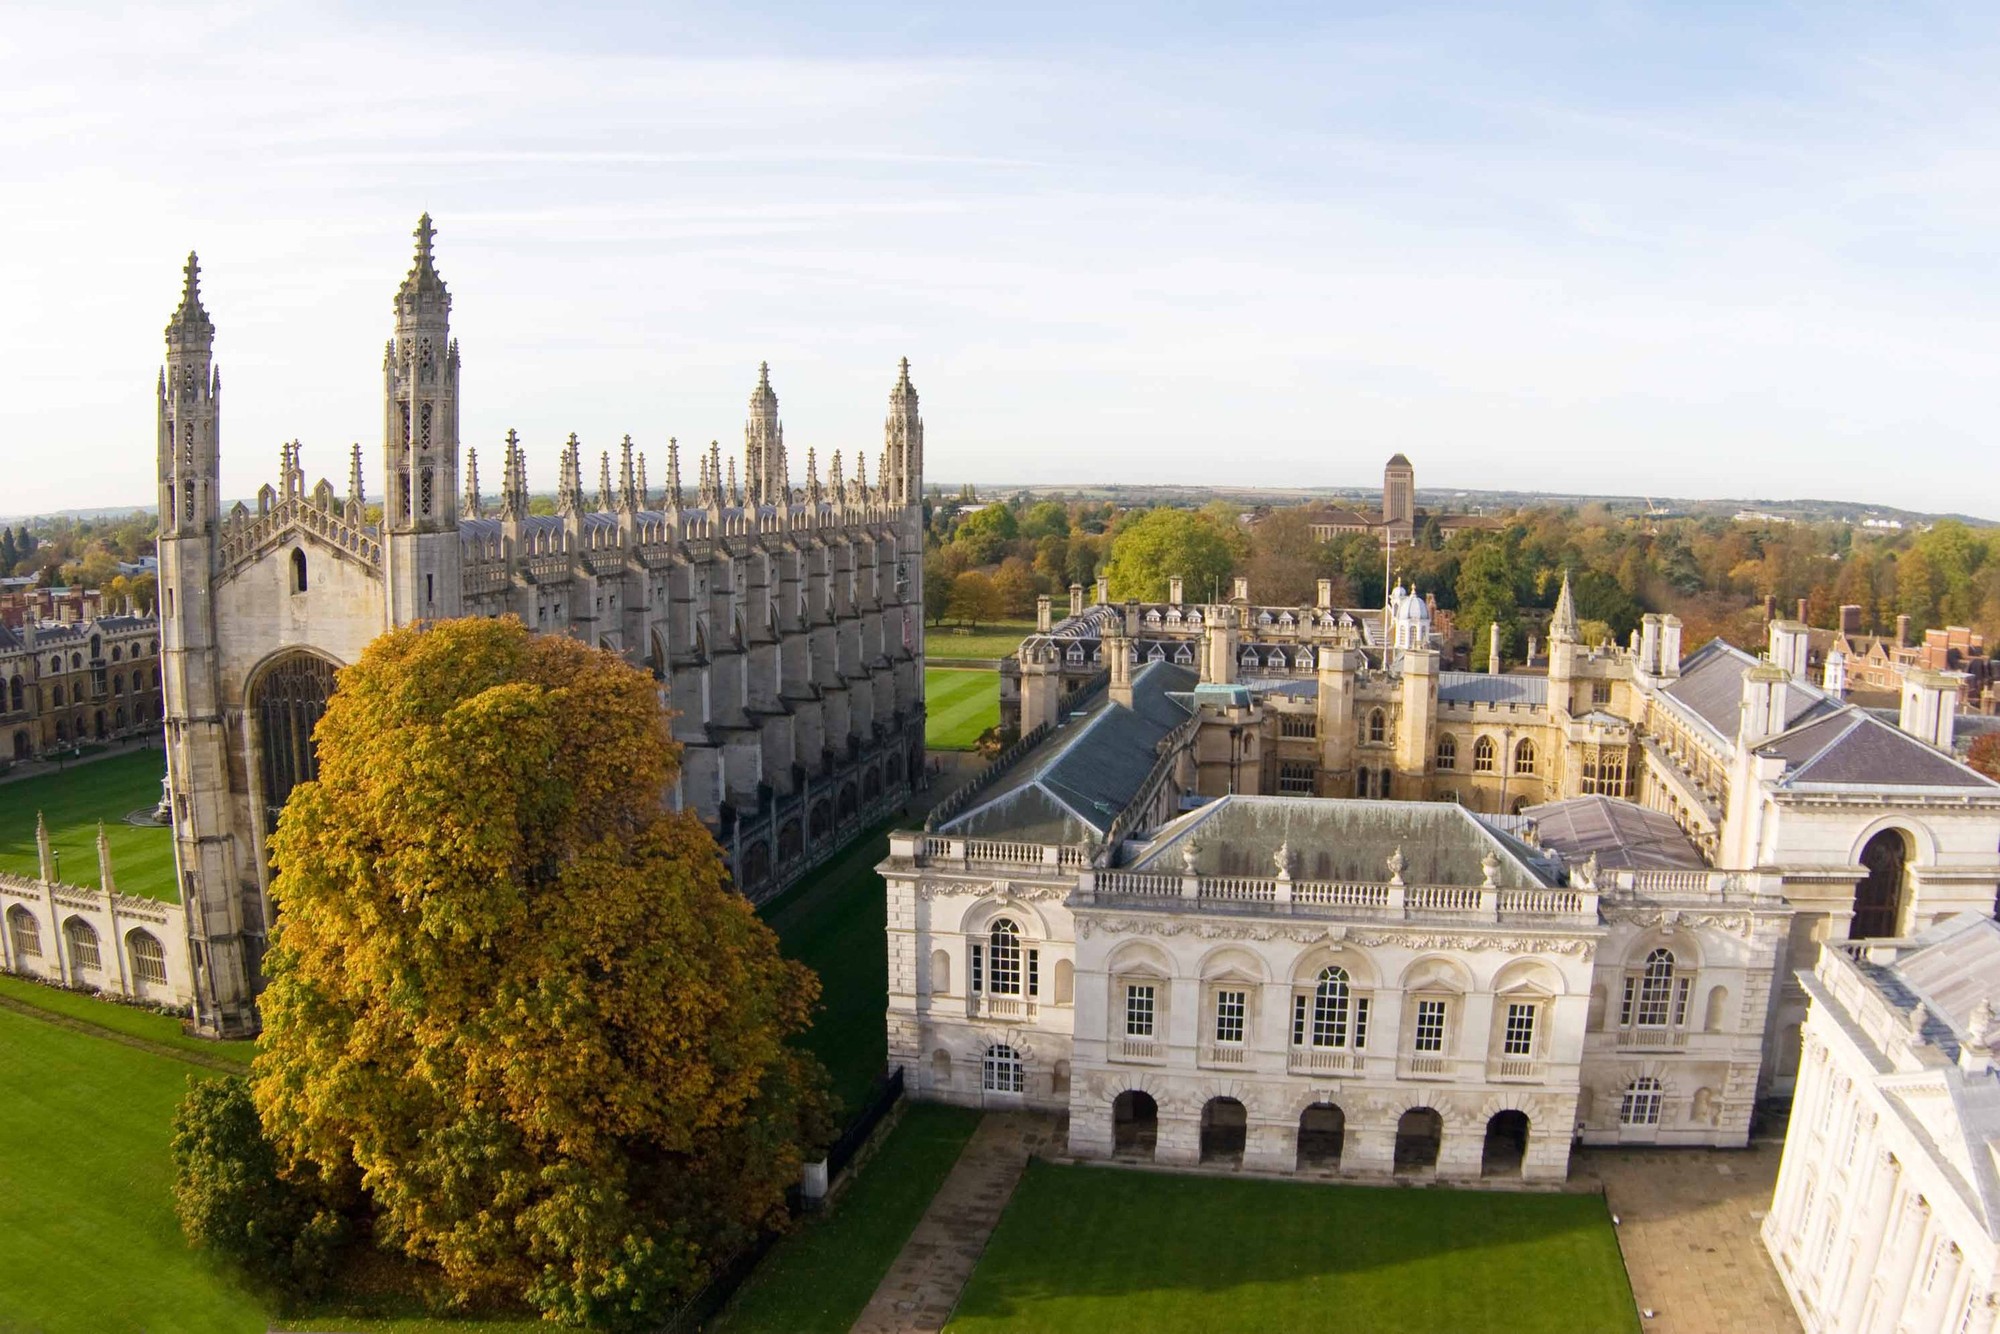 An aerial view of Gibbs Building and King's College Chapel at Cambridge University